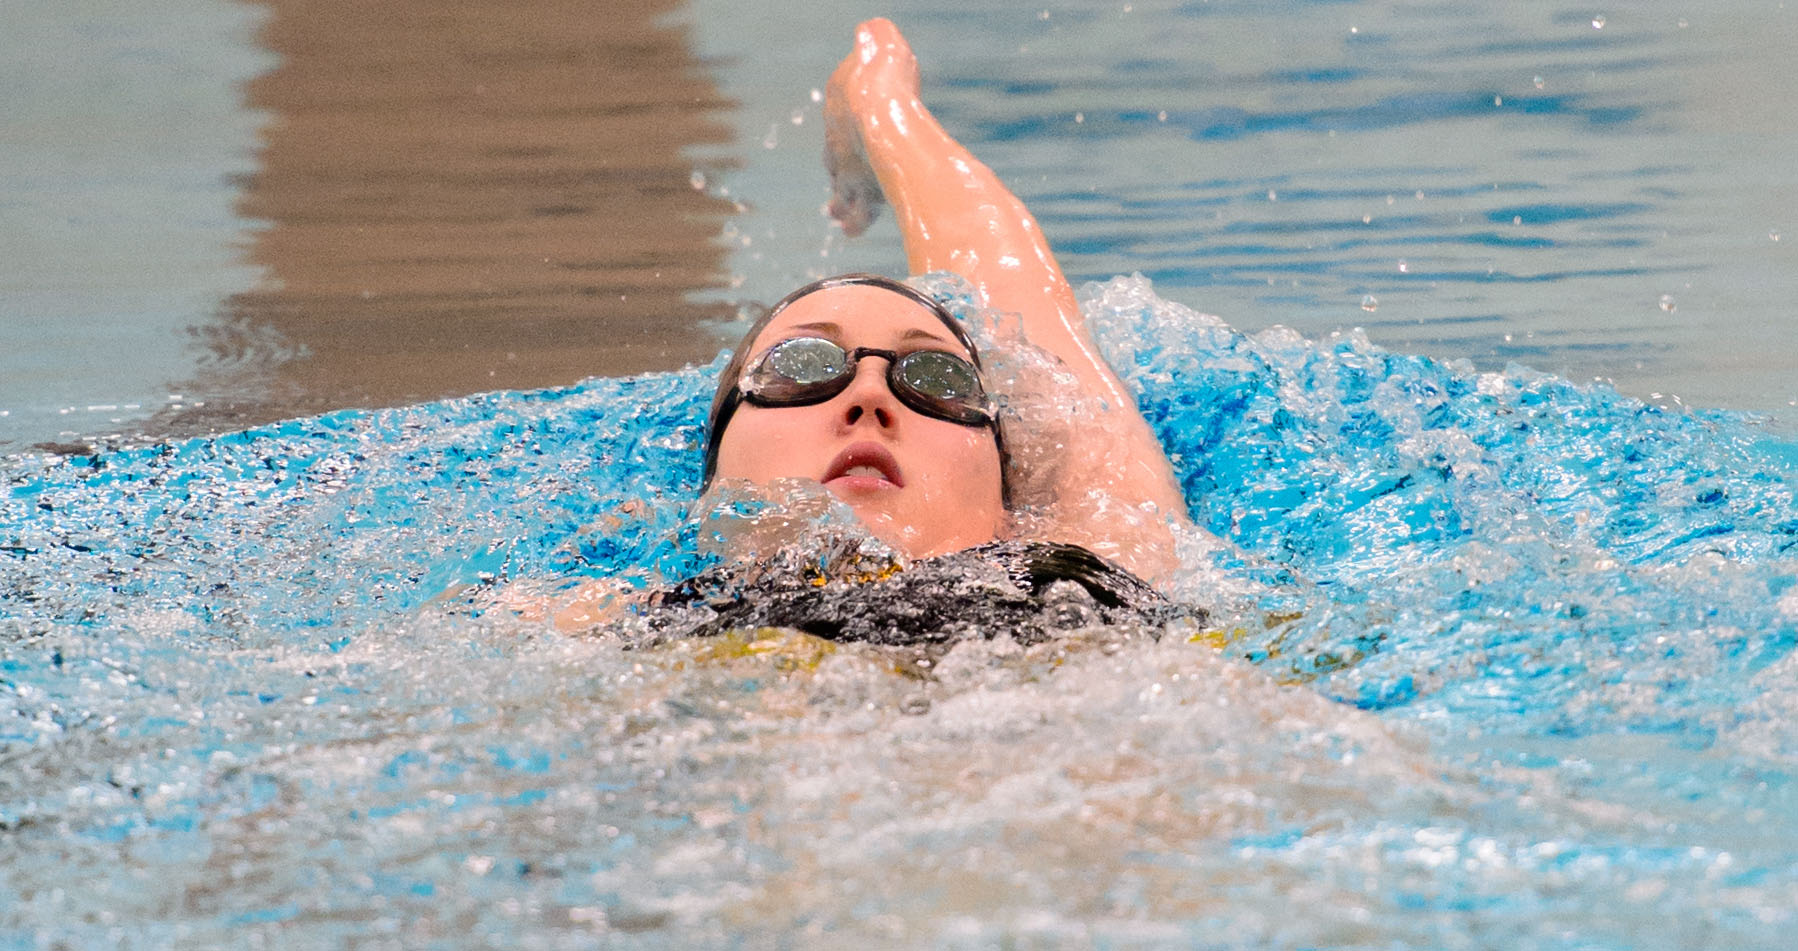 McKinzie Halkola finished in the top six in two events at the WIAC Championship, including the 200-yard backstroke where she placed second.